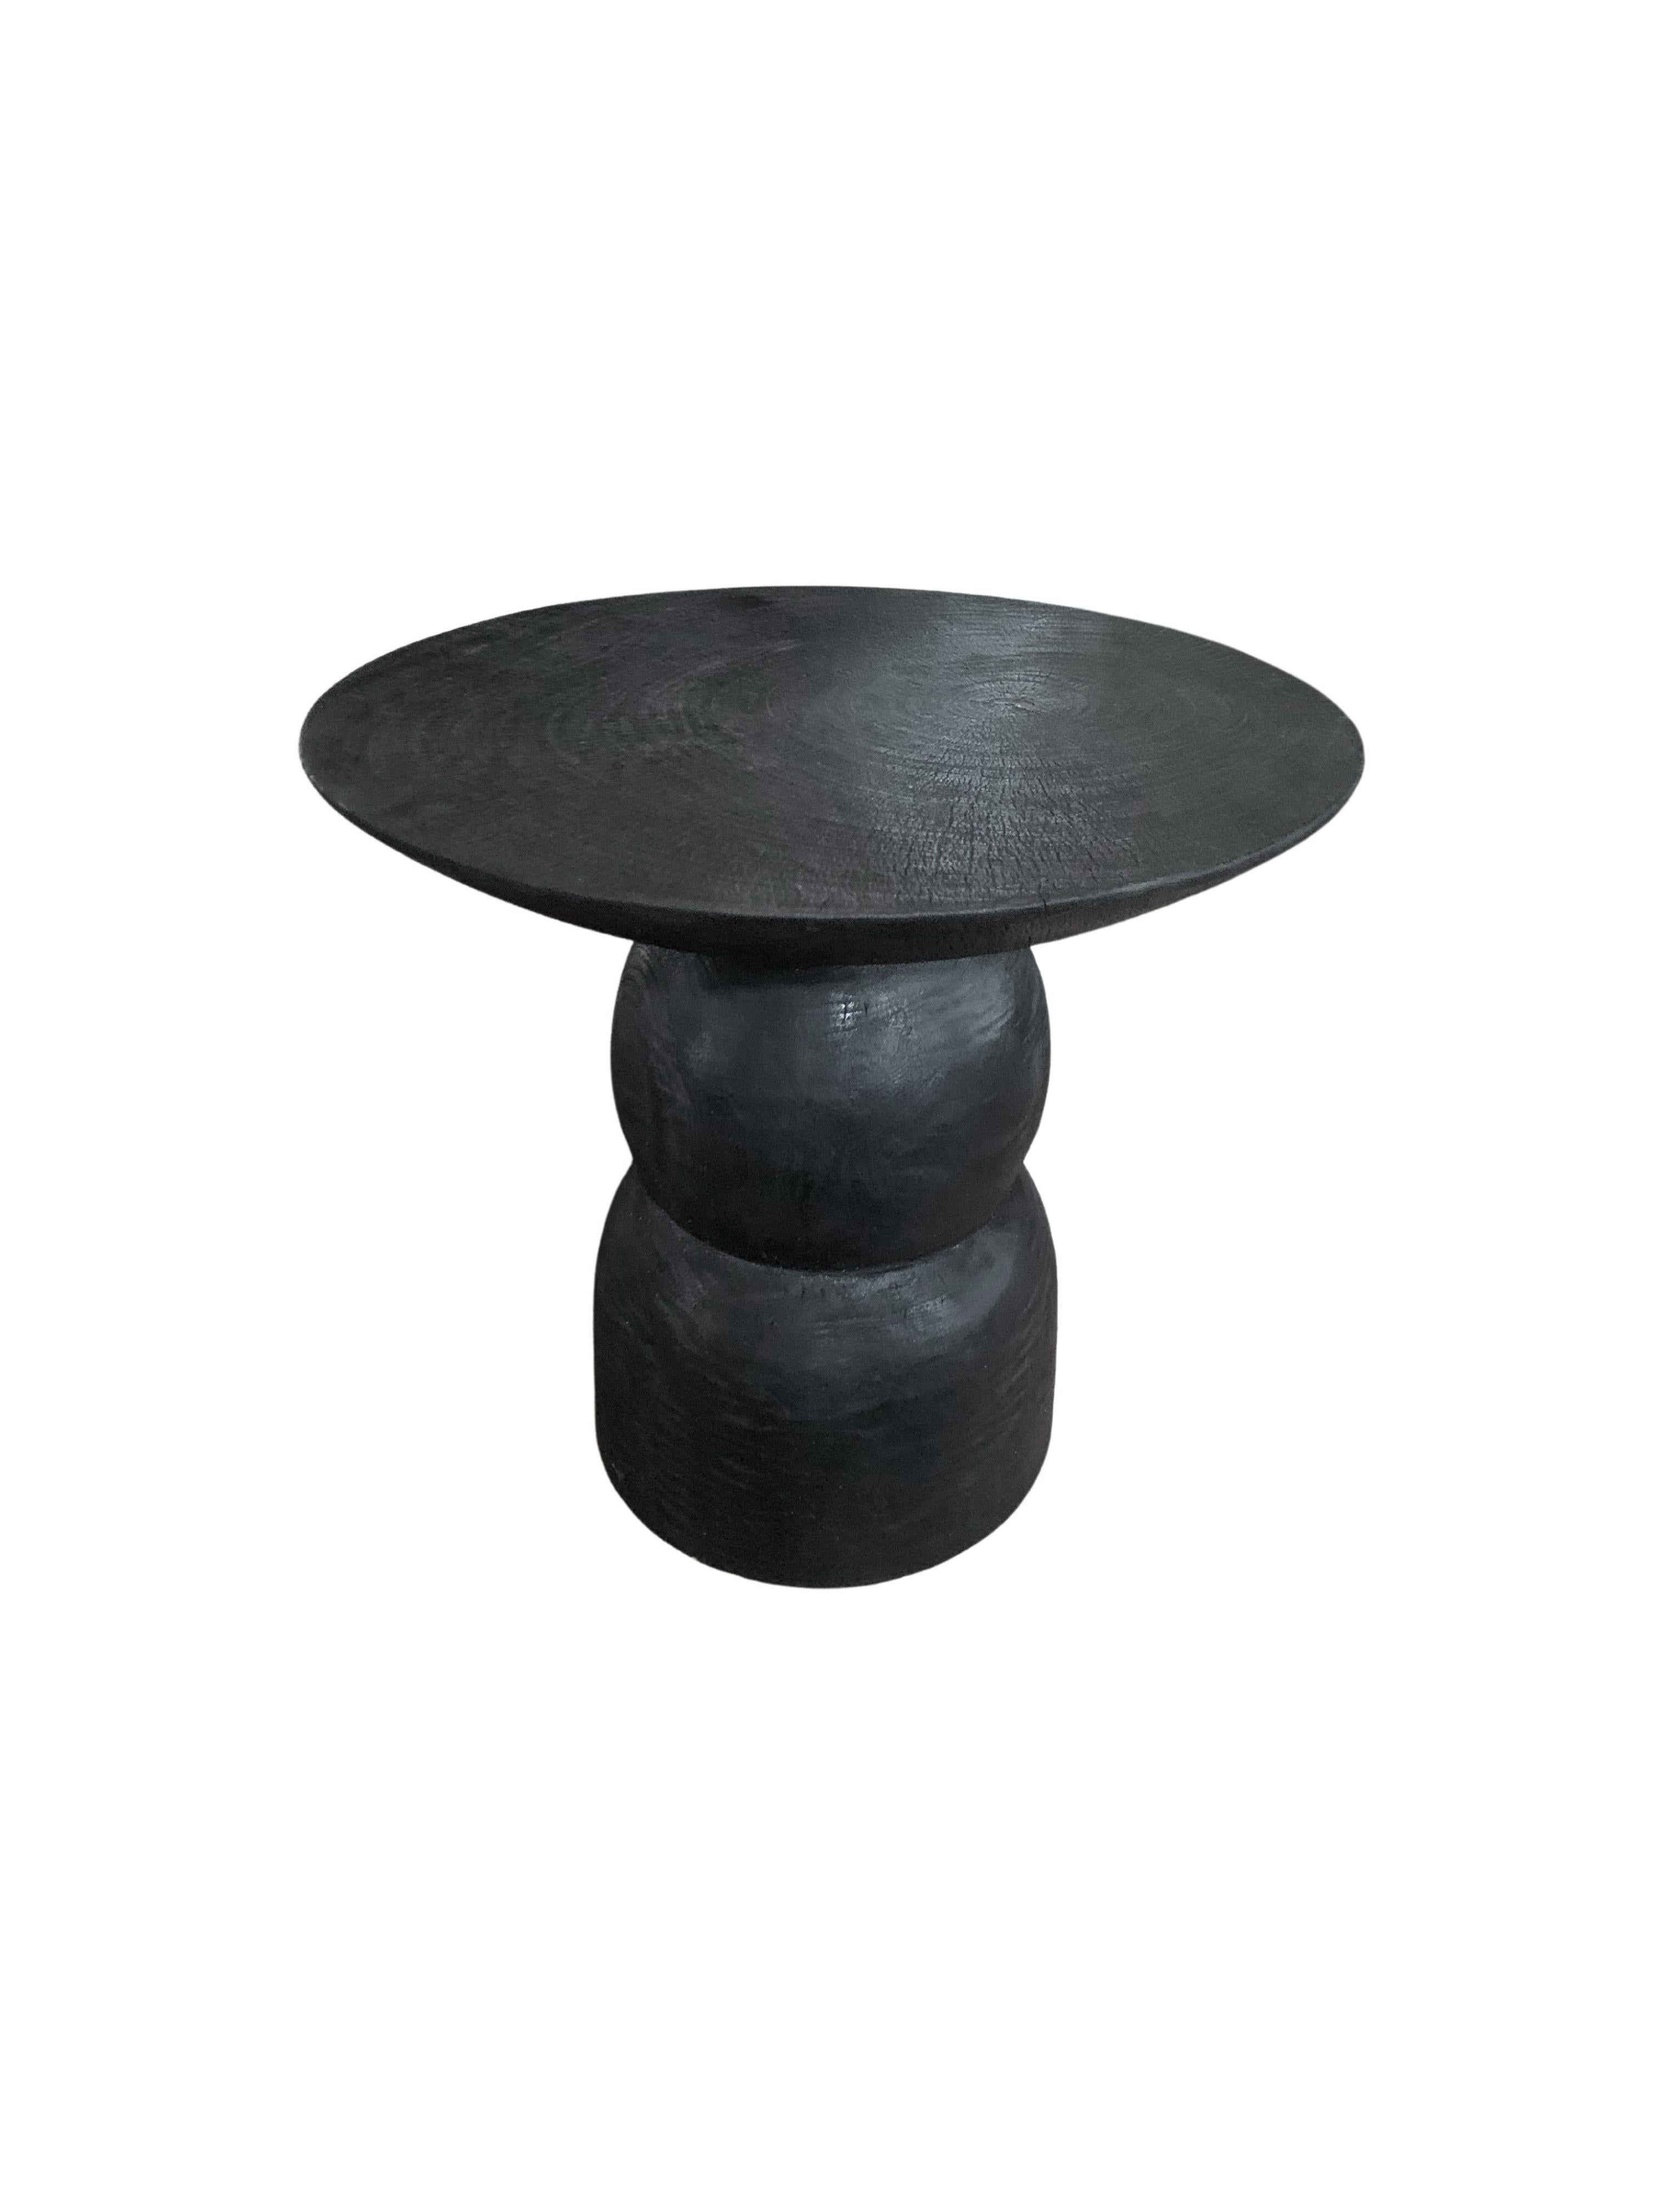 A wonderfully organic round side table. Its rich black pigment was achieved through burning the wood three times. Its neutral pigment and subtle wood texture makes it perfect for any space. A uniquely sculptural and versatile piece certain to invoke